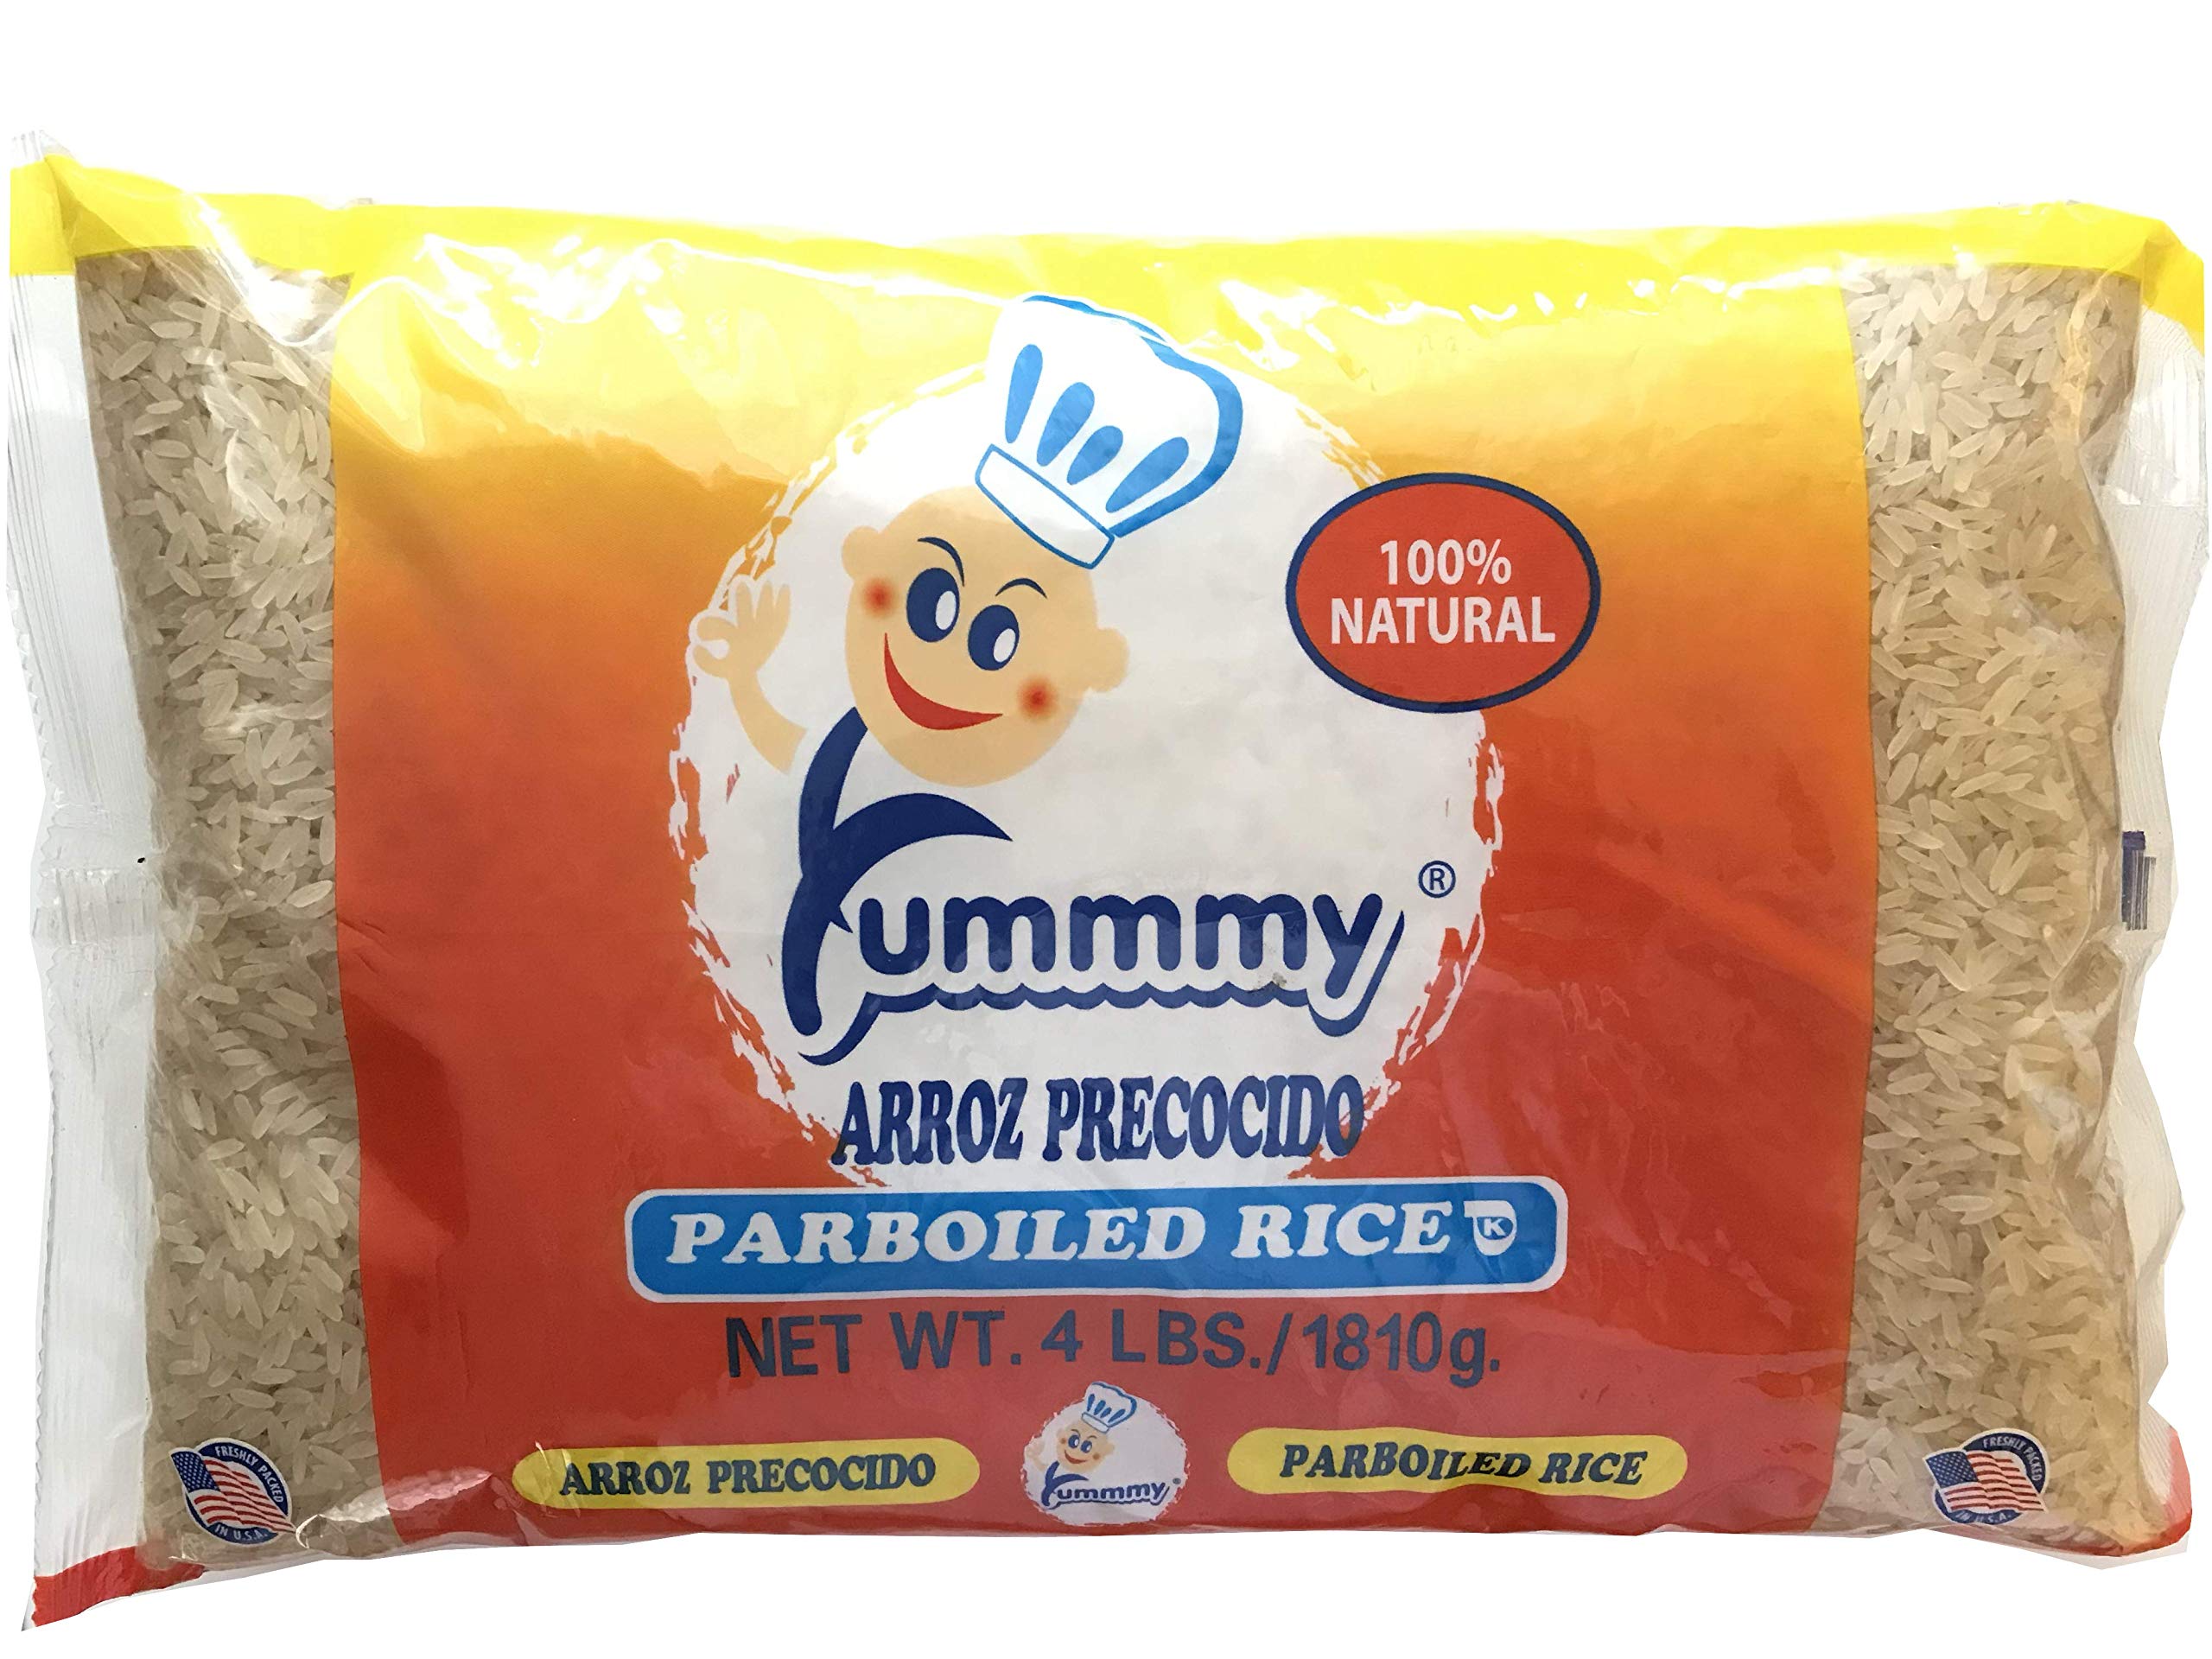 Yummmy Parboiled Long Grain Rice - Arroz Precocido, 4 Lb., Kosher Certified, Made in USA